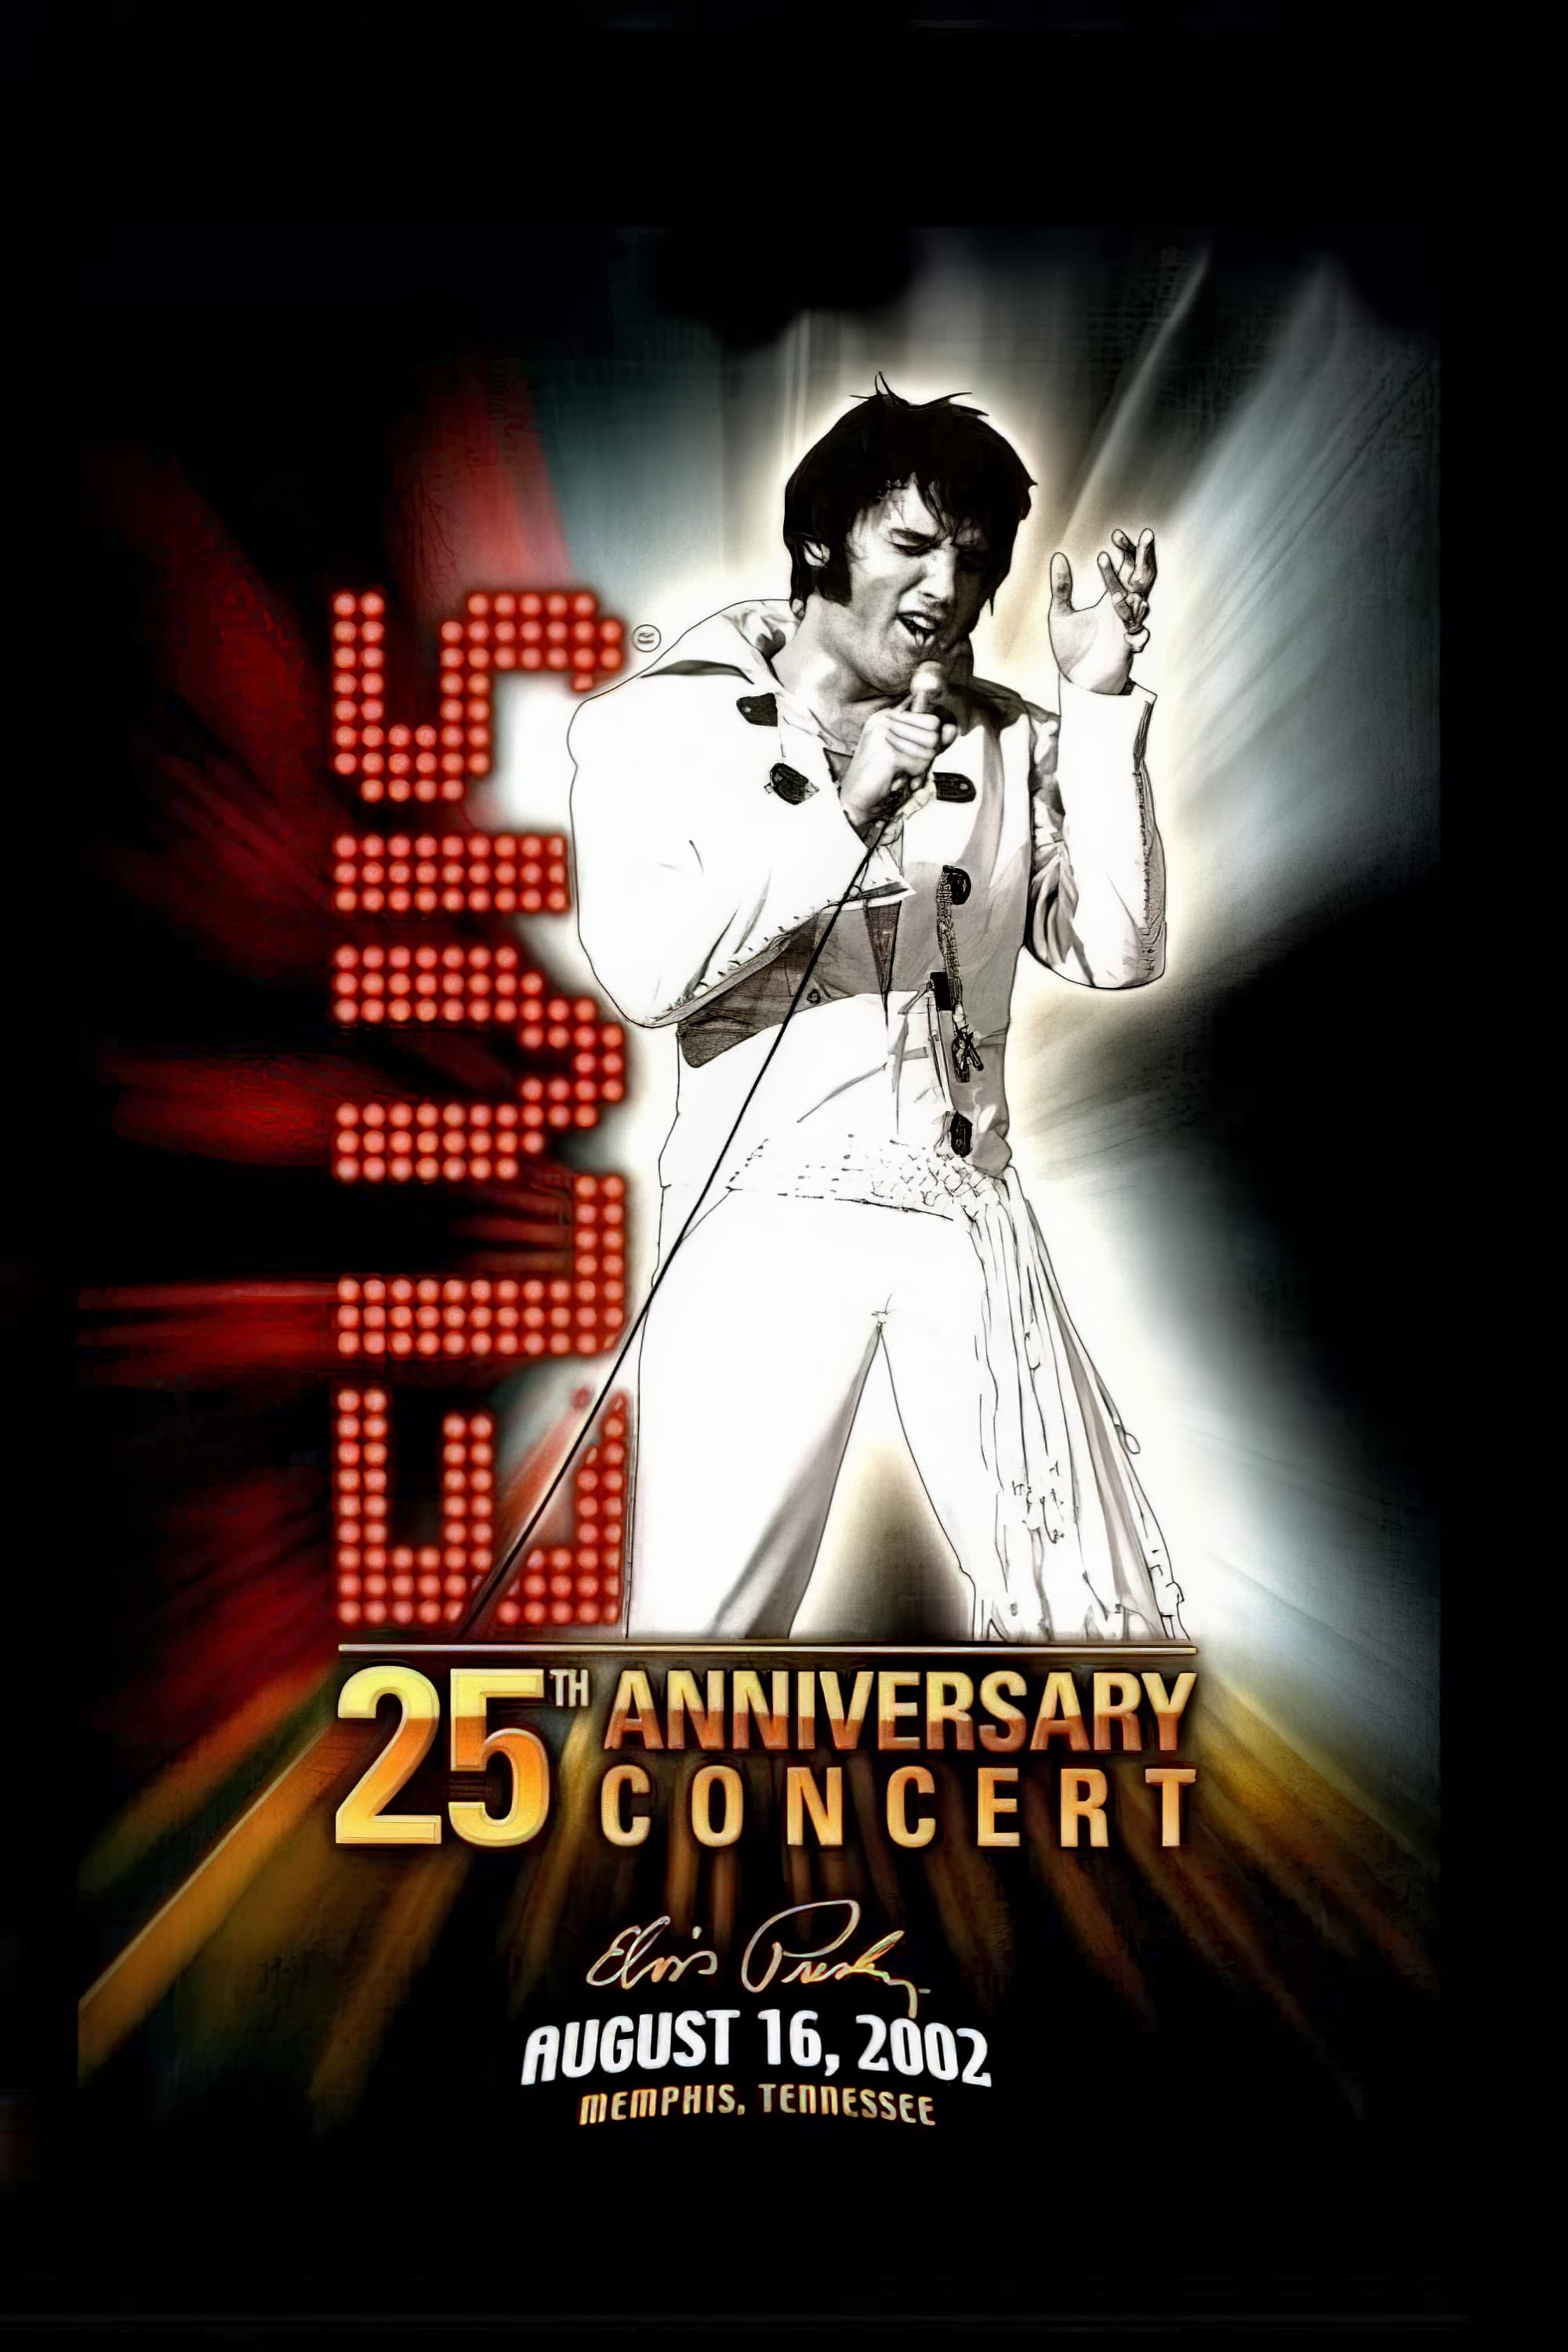 Elvis Lives - The 25th Anniversary Concert, 'Live' from Memphis (2007)